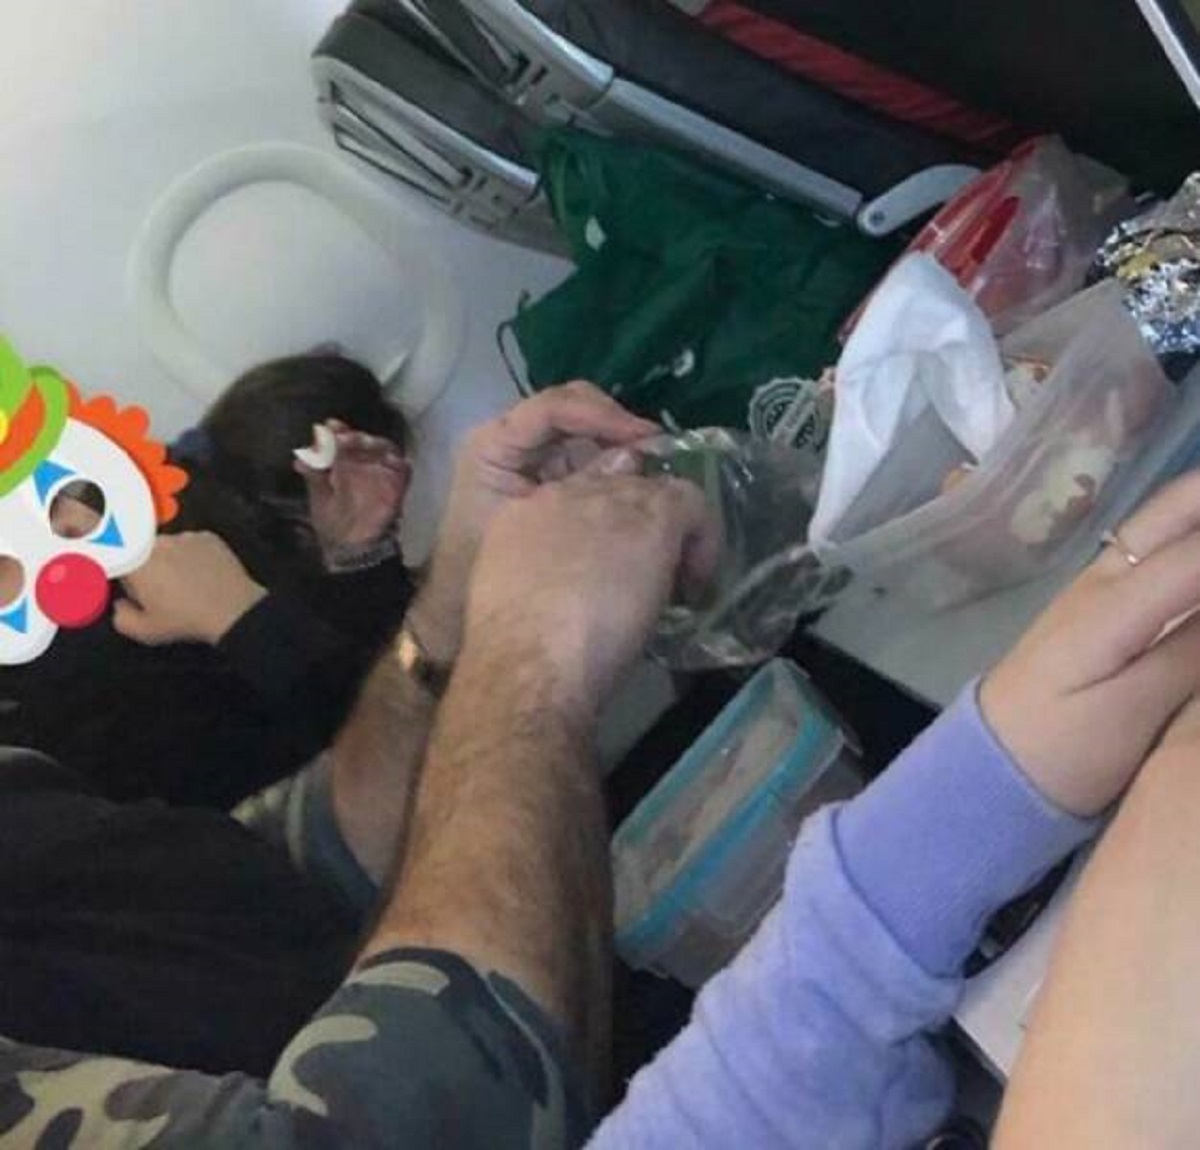 "It Is My First Time On An Airplane In Over A Year And This Guy Is Peeling One Dozen Hard Boiled Eggs For His Family In My Row. Would Give Anything To Be Alone In My House"